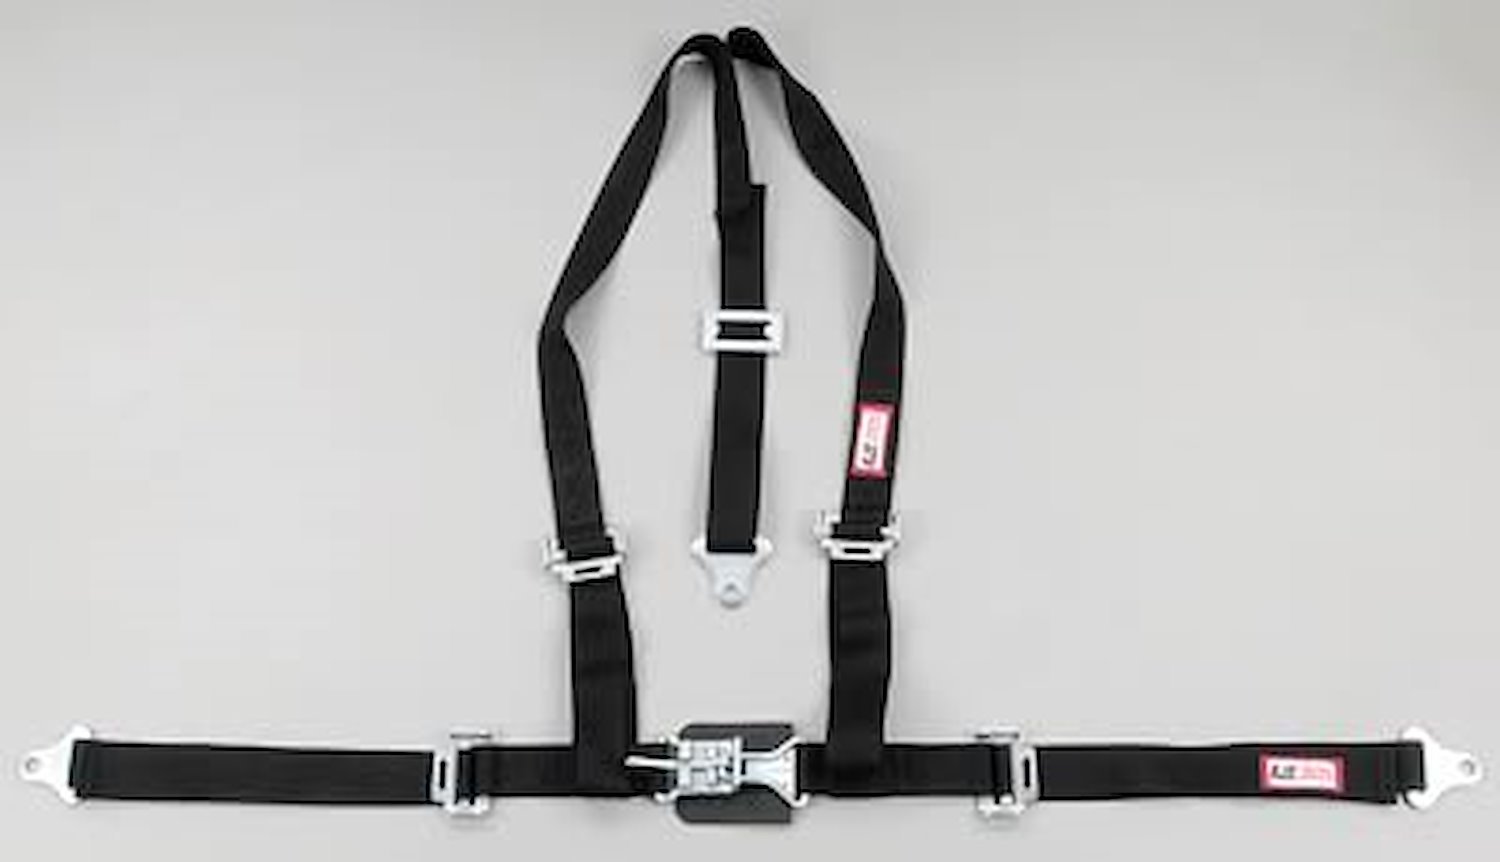 NON-SFI L&L HARNESS 2 PULL DOWN Lap Belt w/Adjuster 2 S.H. Individual ROLL BAR MOUNT w/STERNUM STRAP ALL WRAP ENDS GRAY